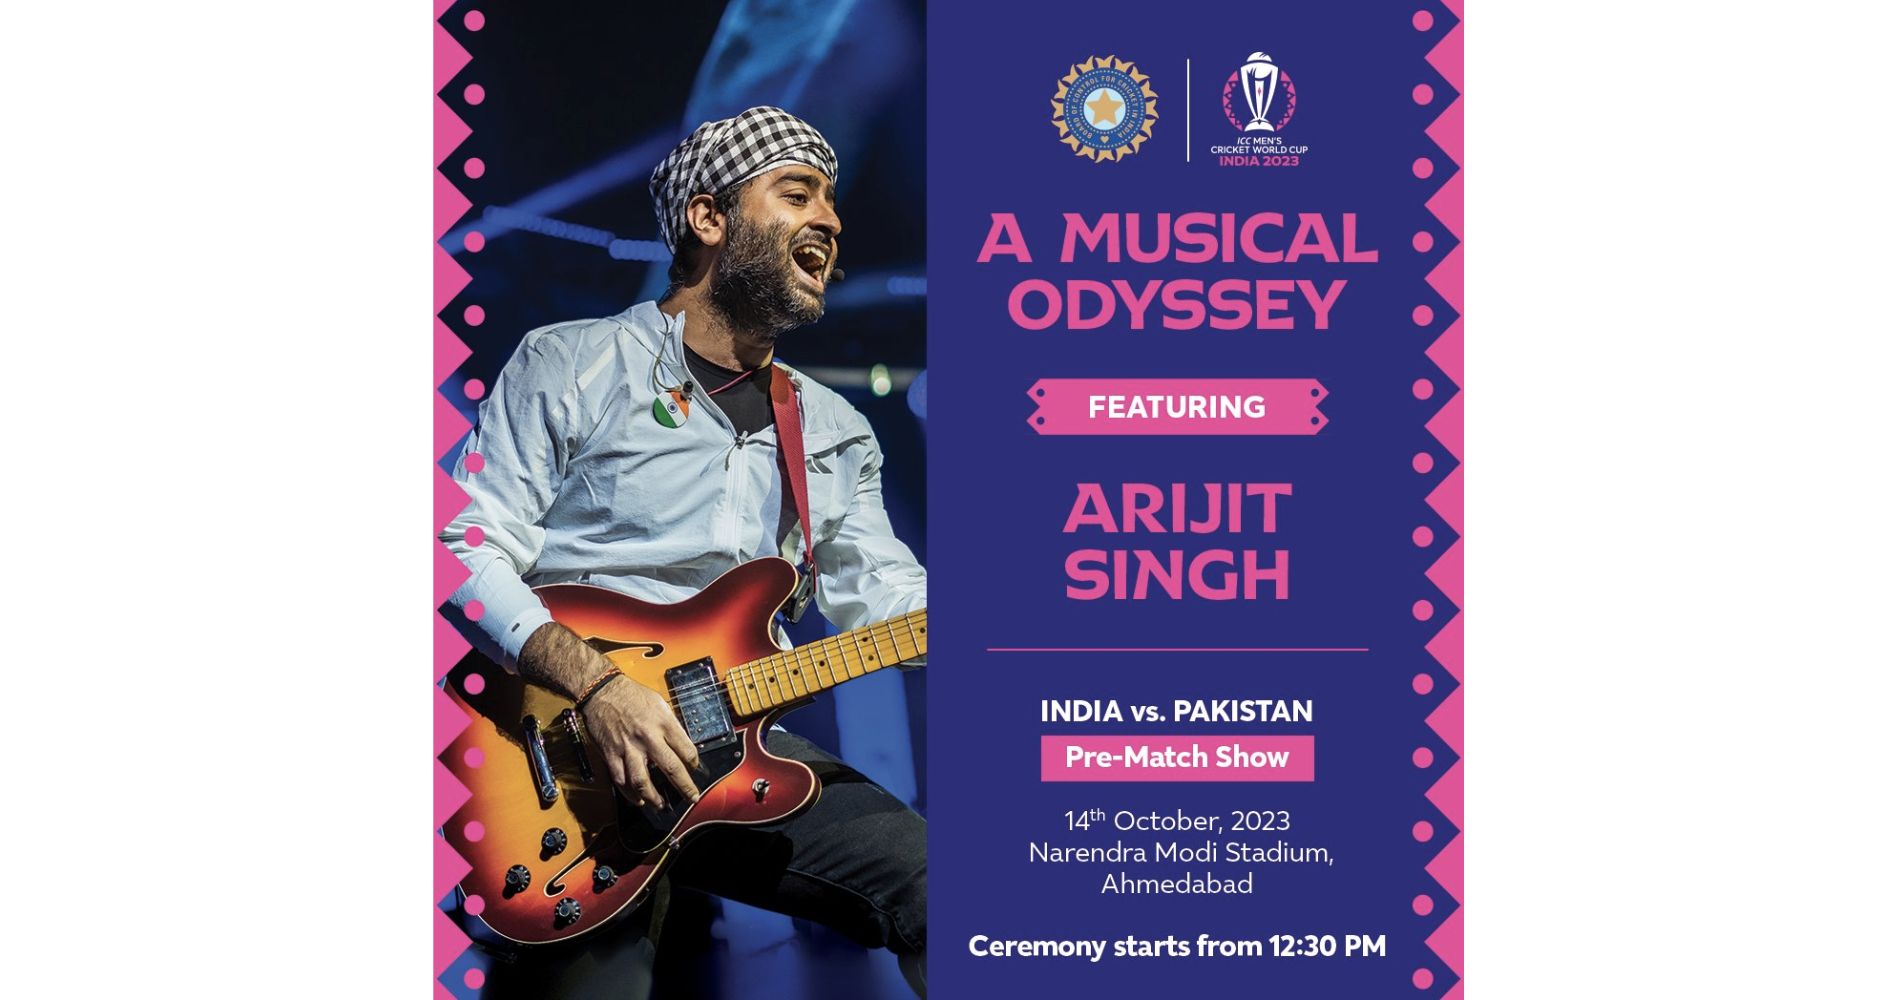 Arijit Singh To perform Live At Ahmedabad's Modi Stadium Ahead Of The India-Pakistan ICC World Cup Match